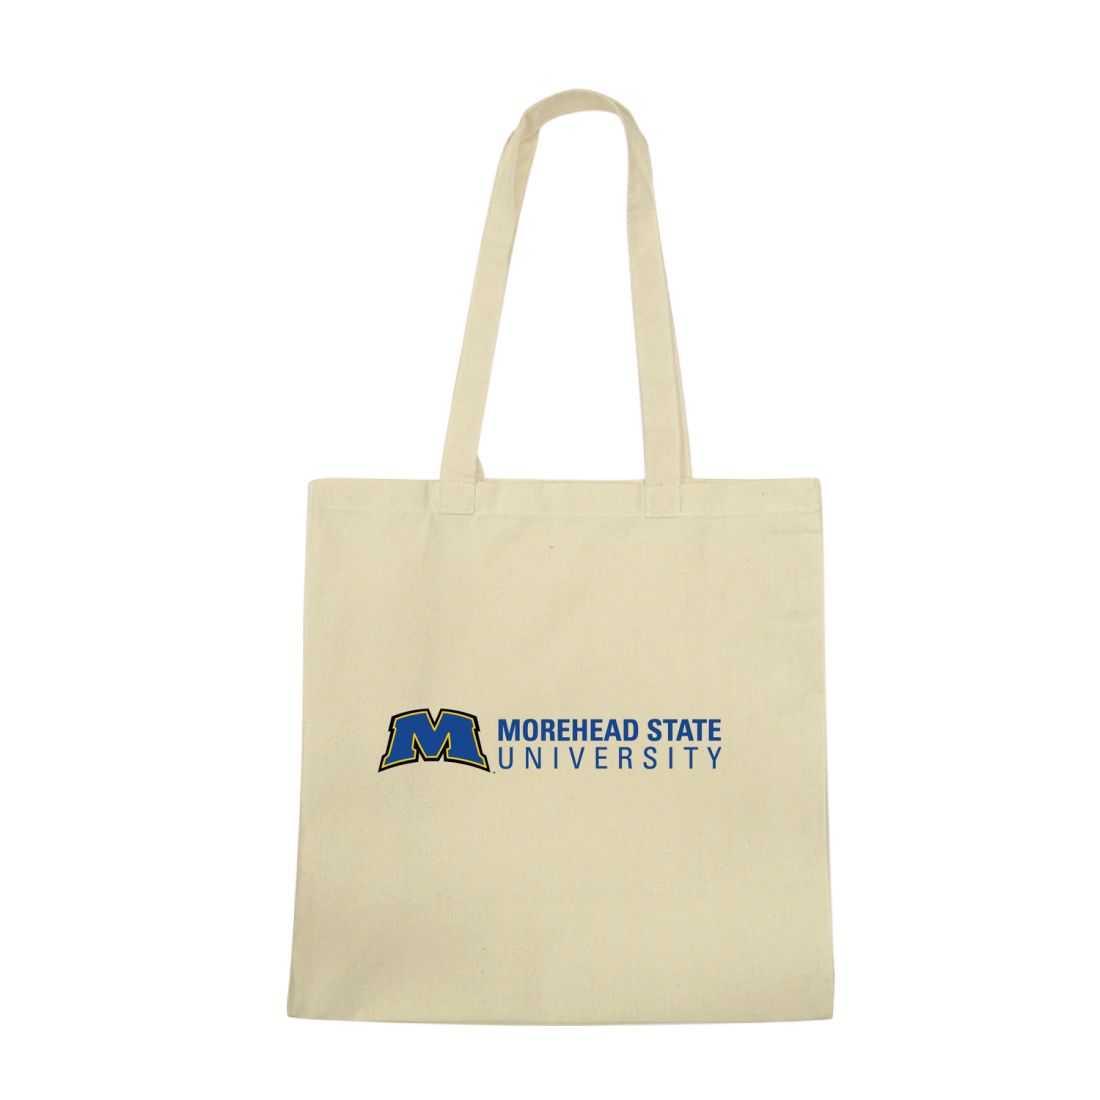 MSU Morehead State University Eagles Institutional Tote Bag